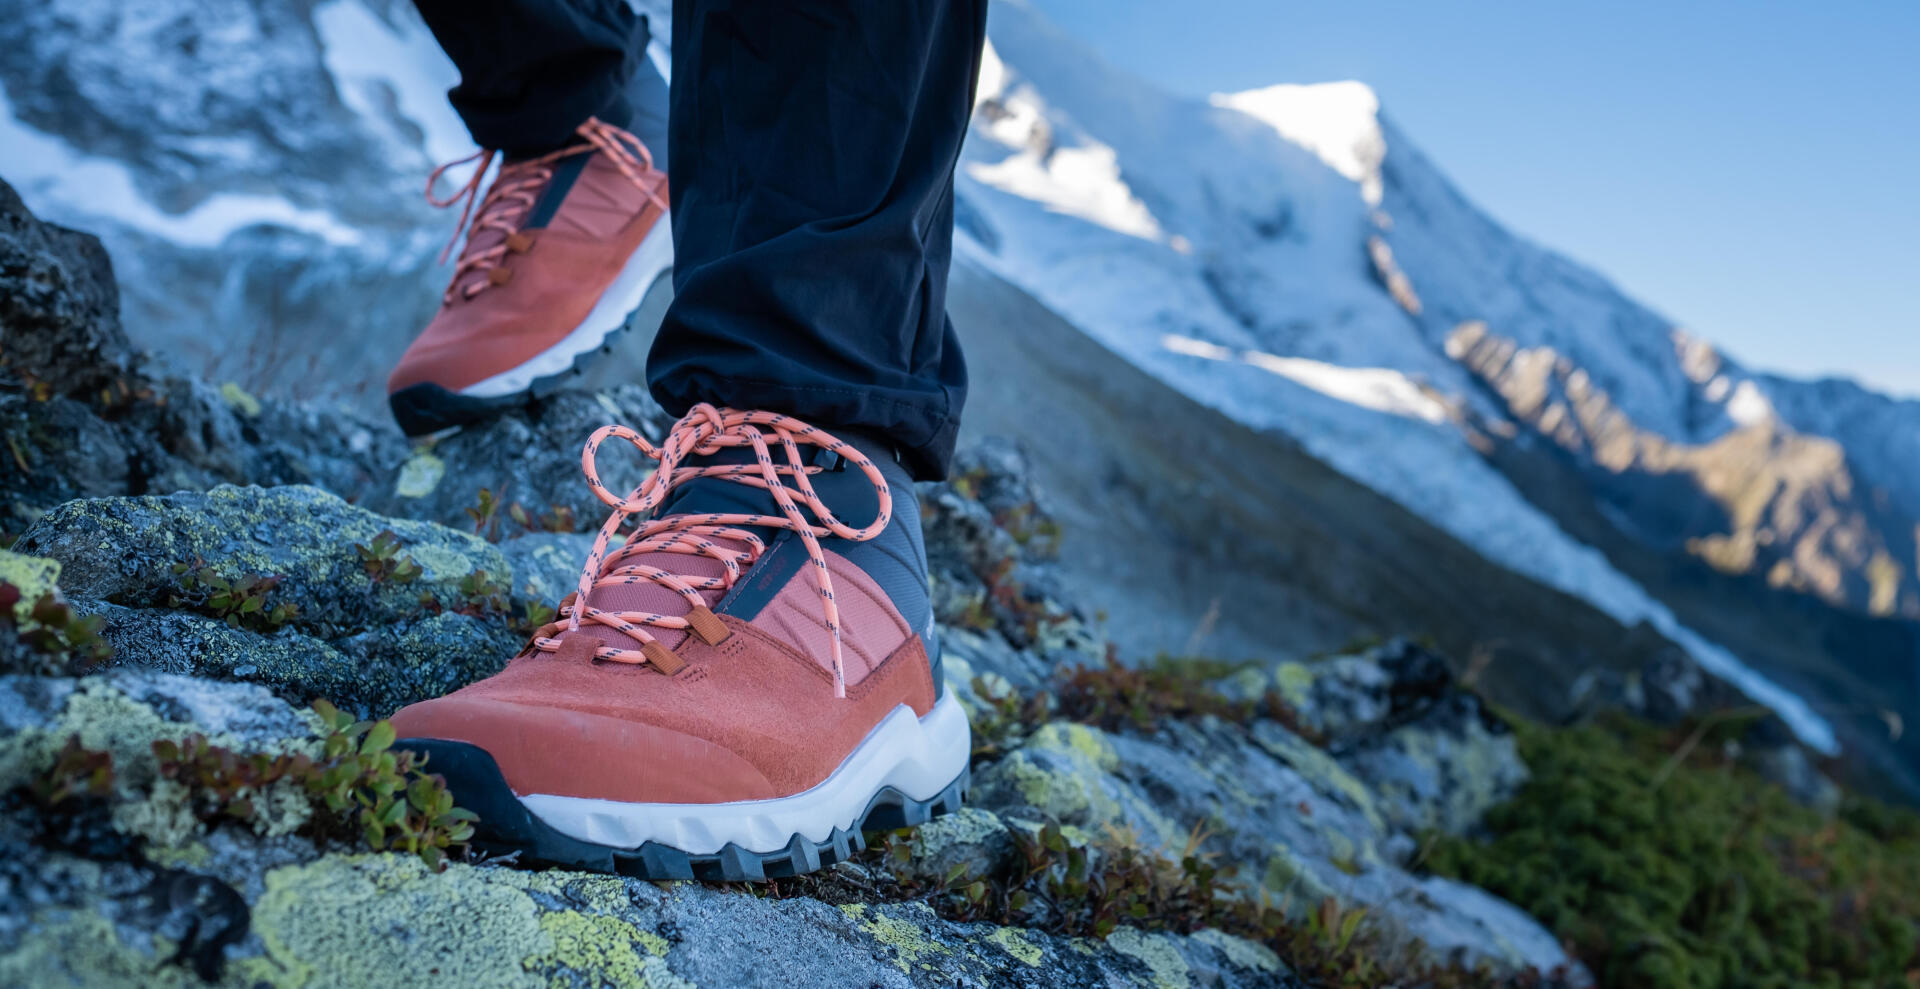 Contact technology: all-terrain hiking shoes